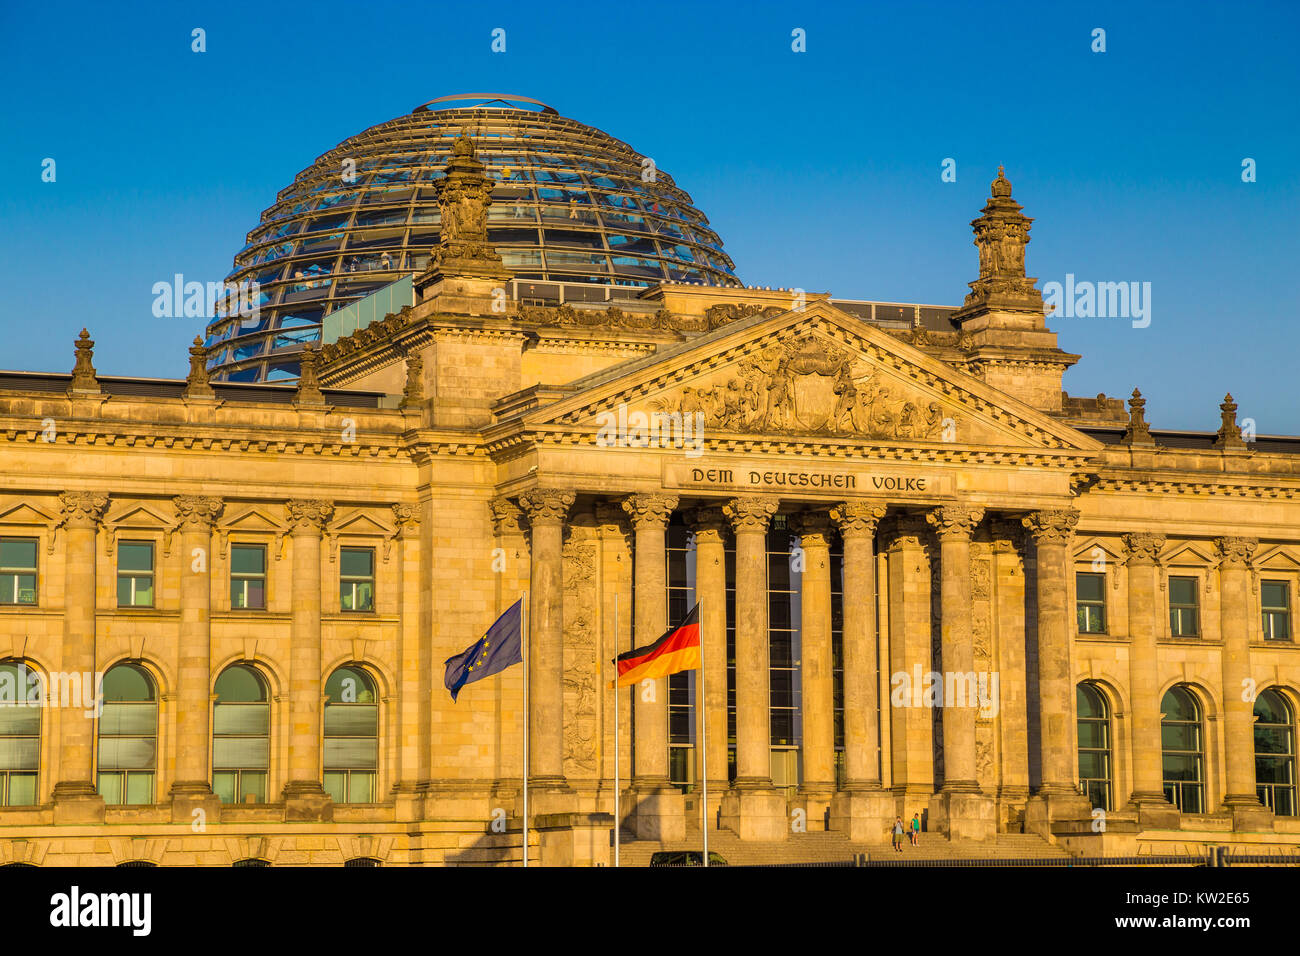 Close-up view of famous Reichstag building, seat of the German Parliament (Deutscher Bundestag), in beautiful golden evening light at sunset, Berlin Stock Photo